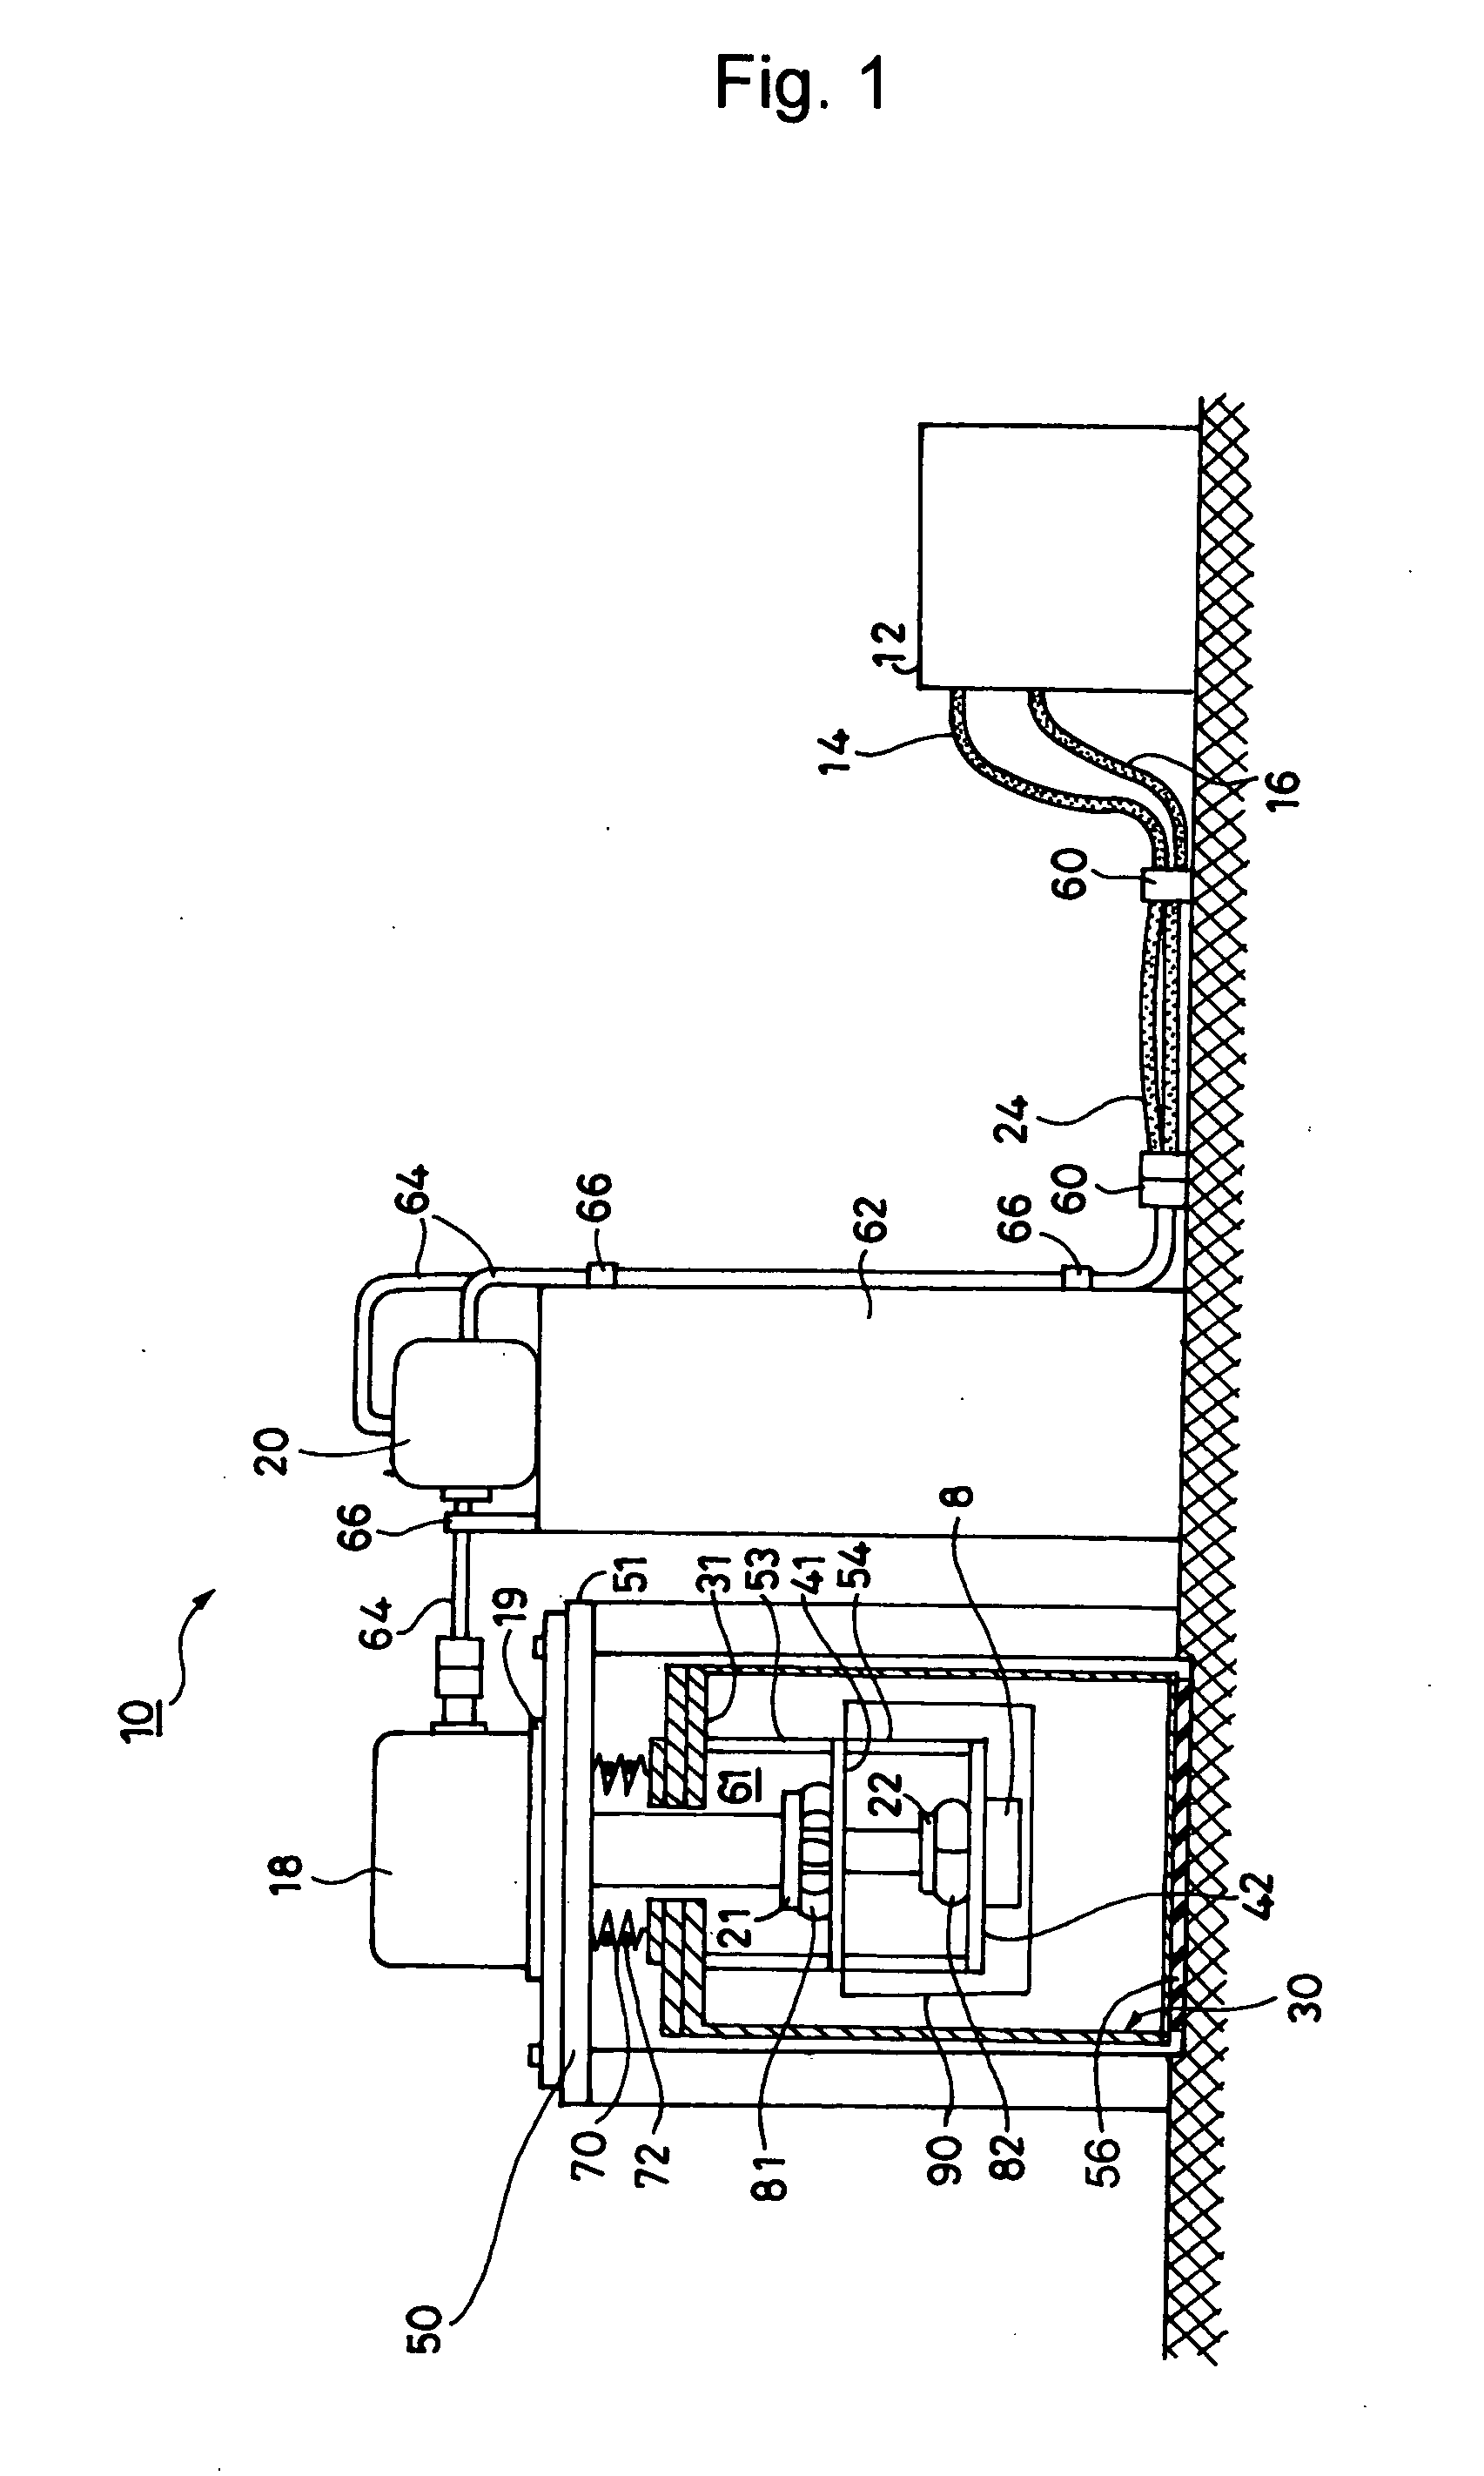 Cryogenic cooling apparatus